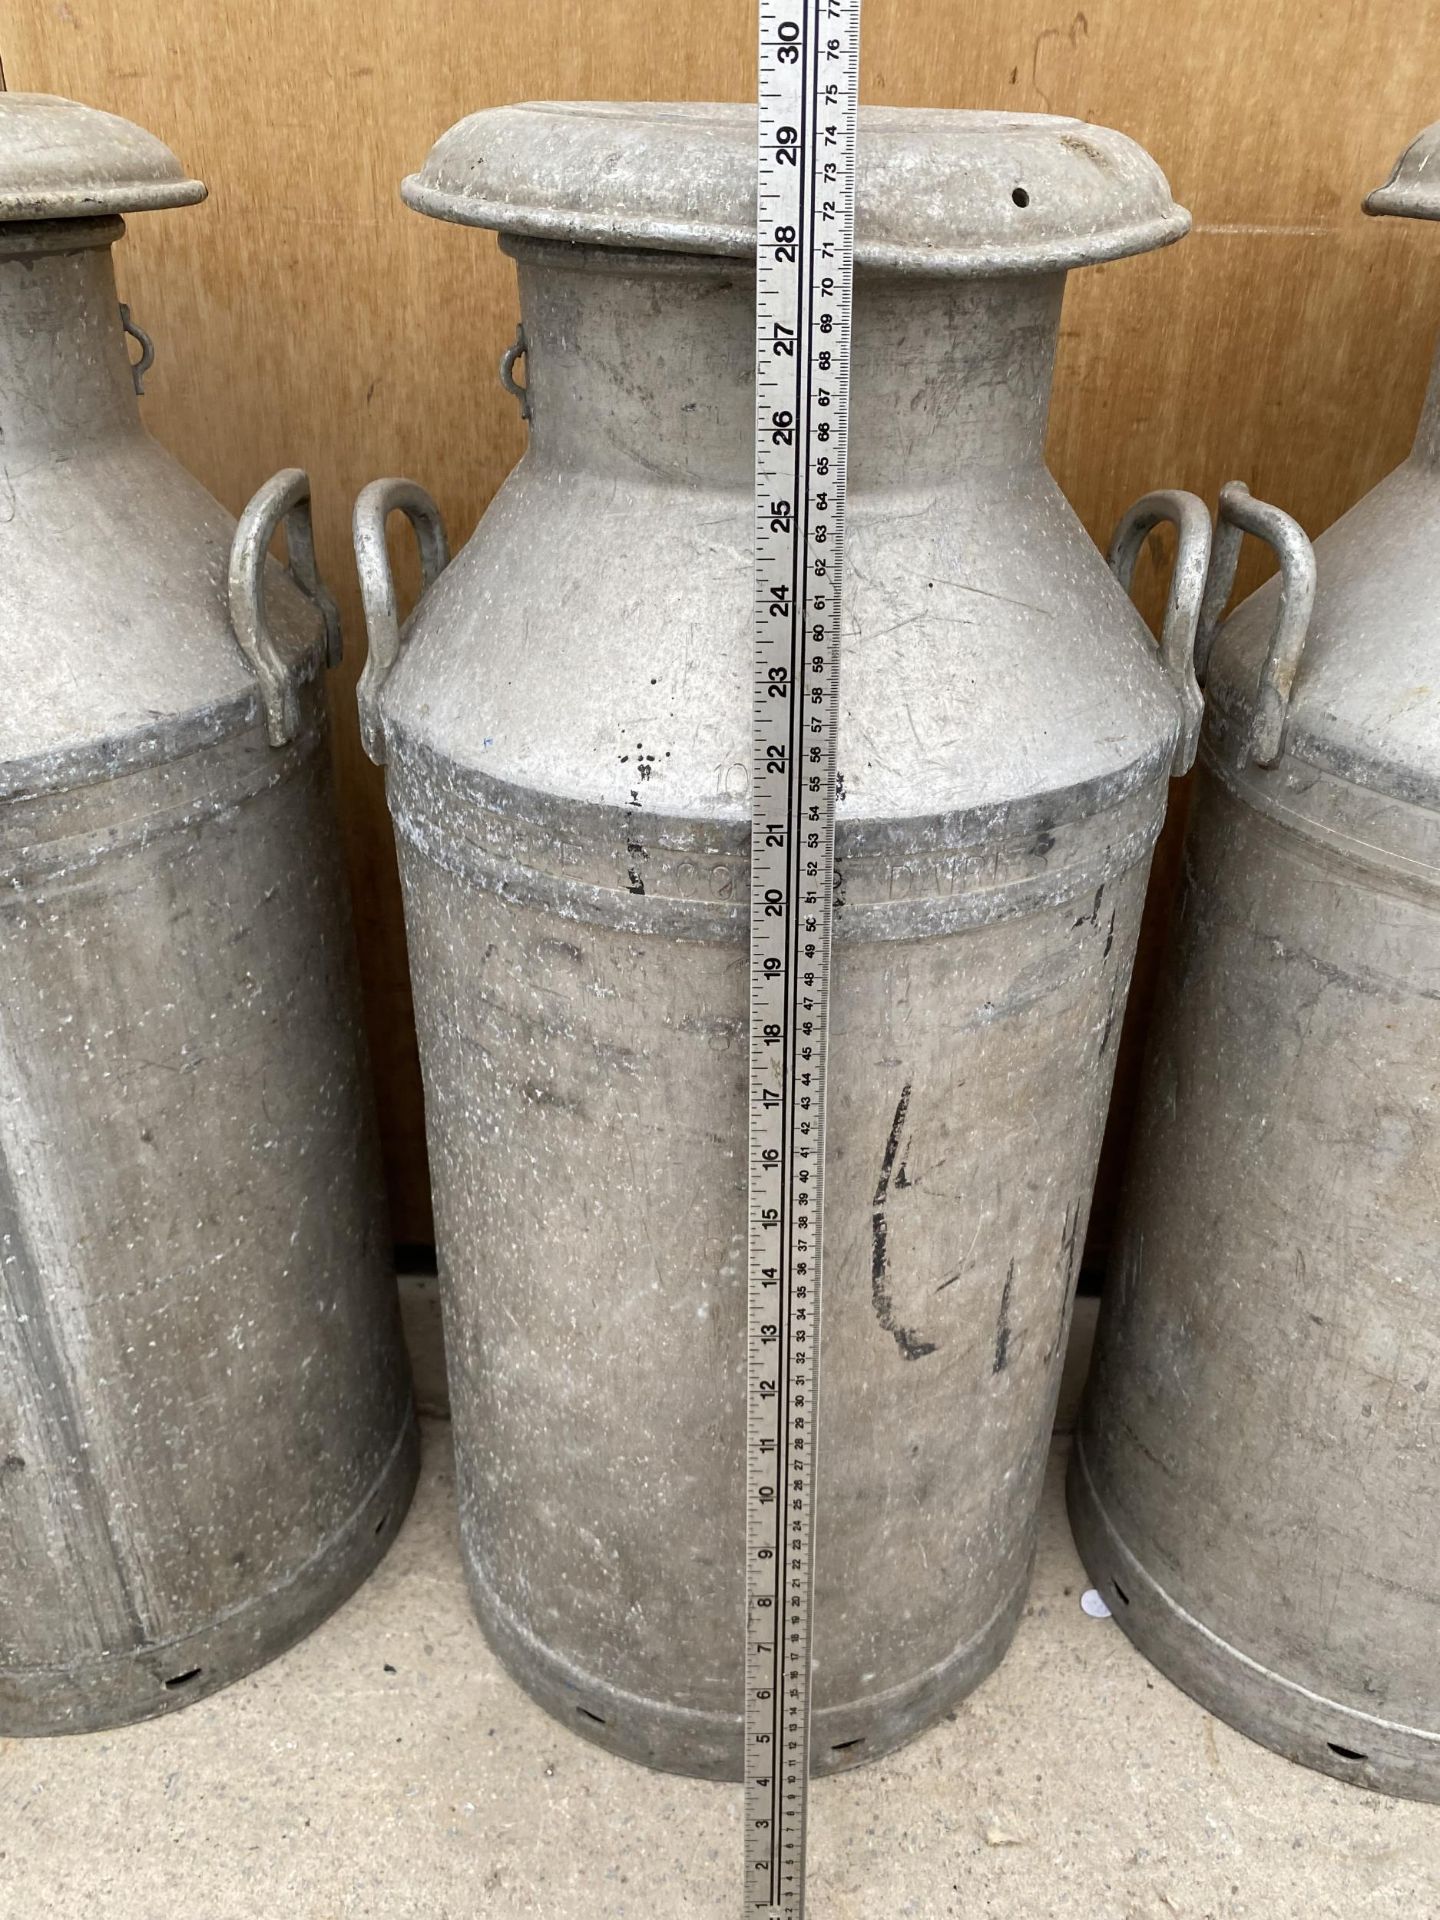 AN ALUMINIUM MILK CHURN COMPLETE WITH LID - Image 2 of 2